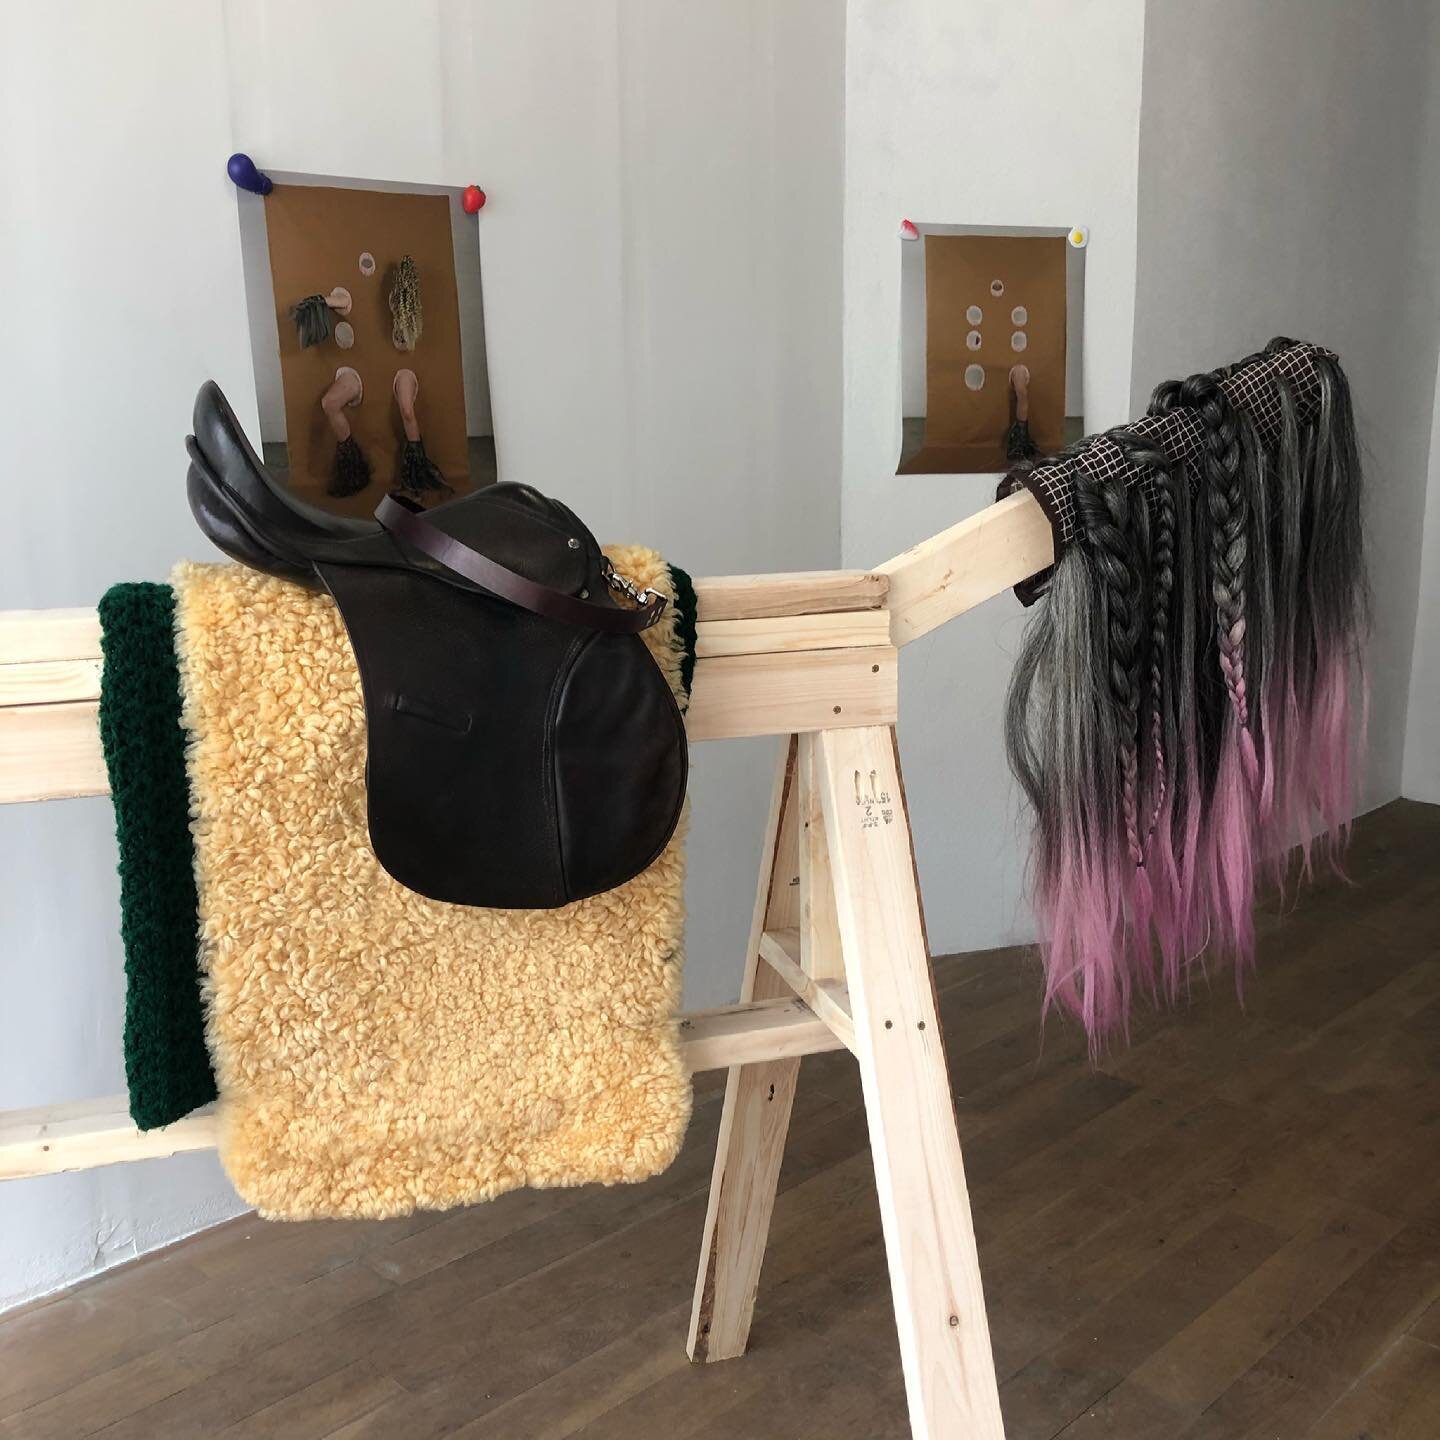 In SAW HORSES AND PONIES: A 21ST CENTURY TAIL, artist Mike Bourscheid turns masked interactions with  adorned, coiffed gloves into an ontological study. Reflecting on his own individuality vis-&agrave;-vis the other, and &mdash; via the  gloves-turne